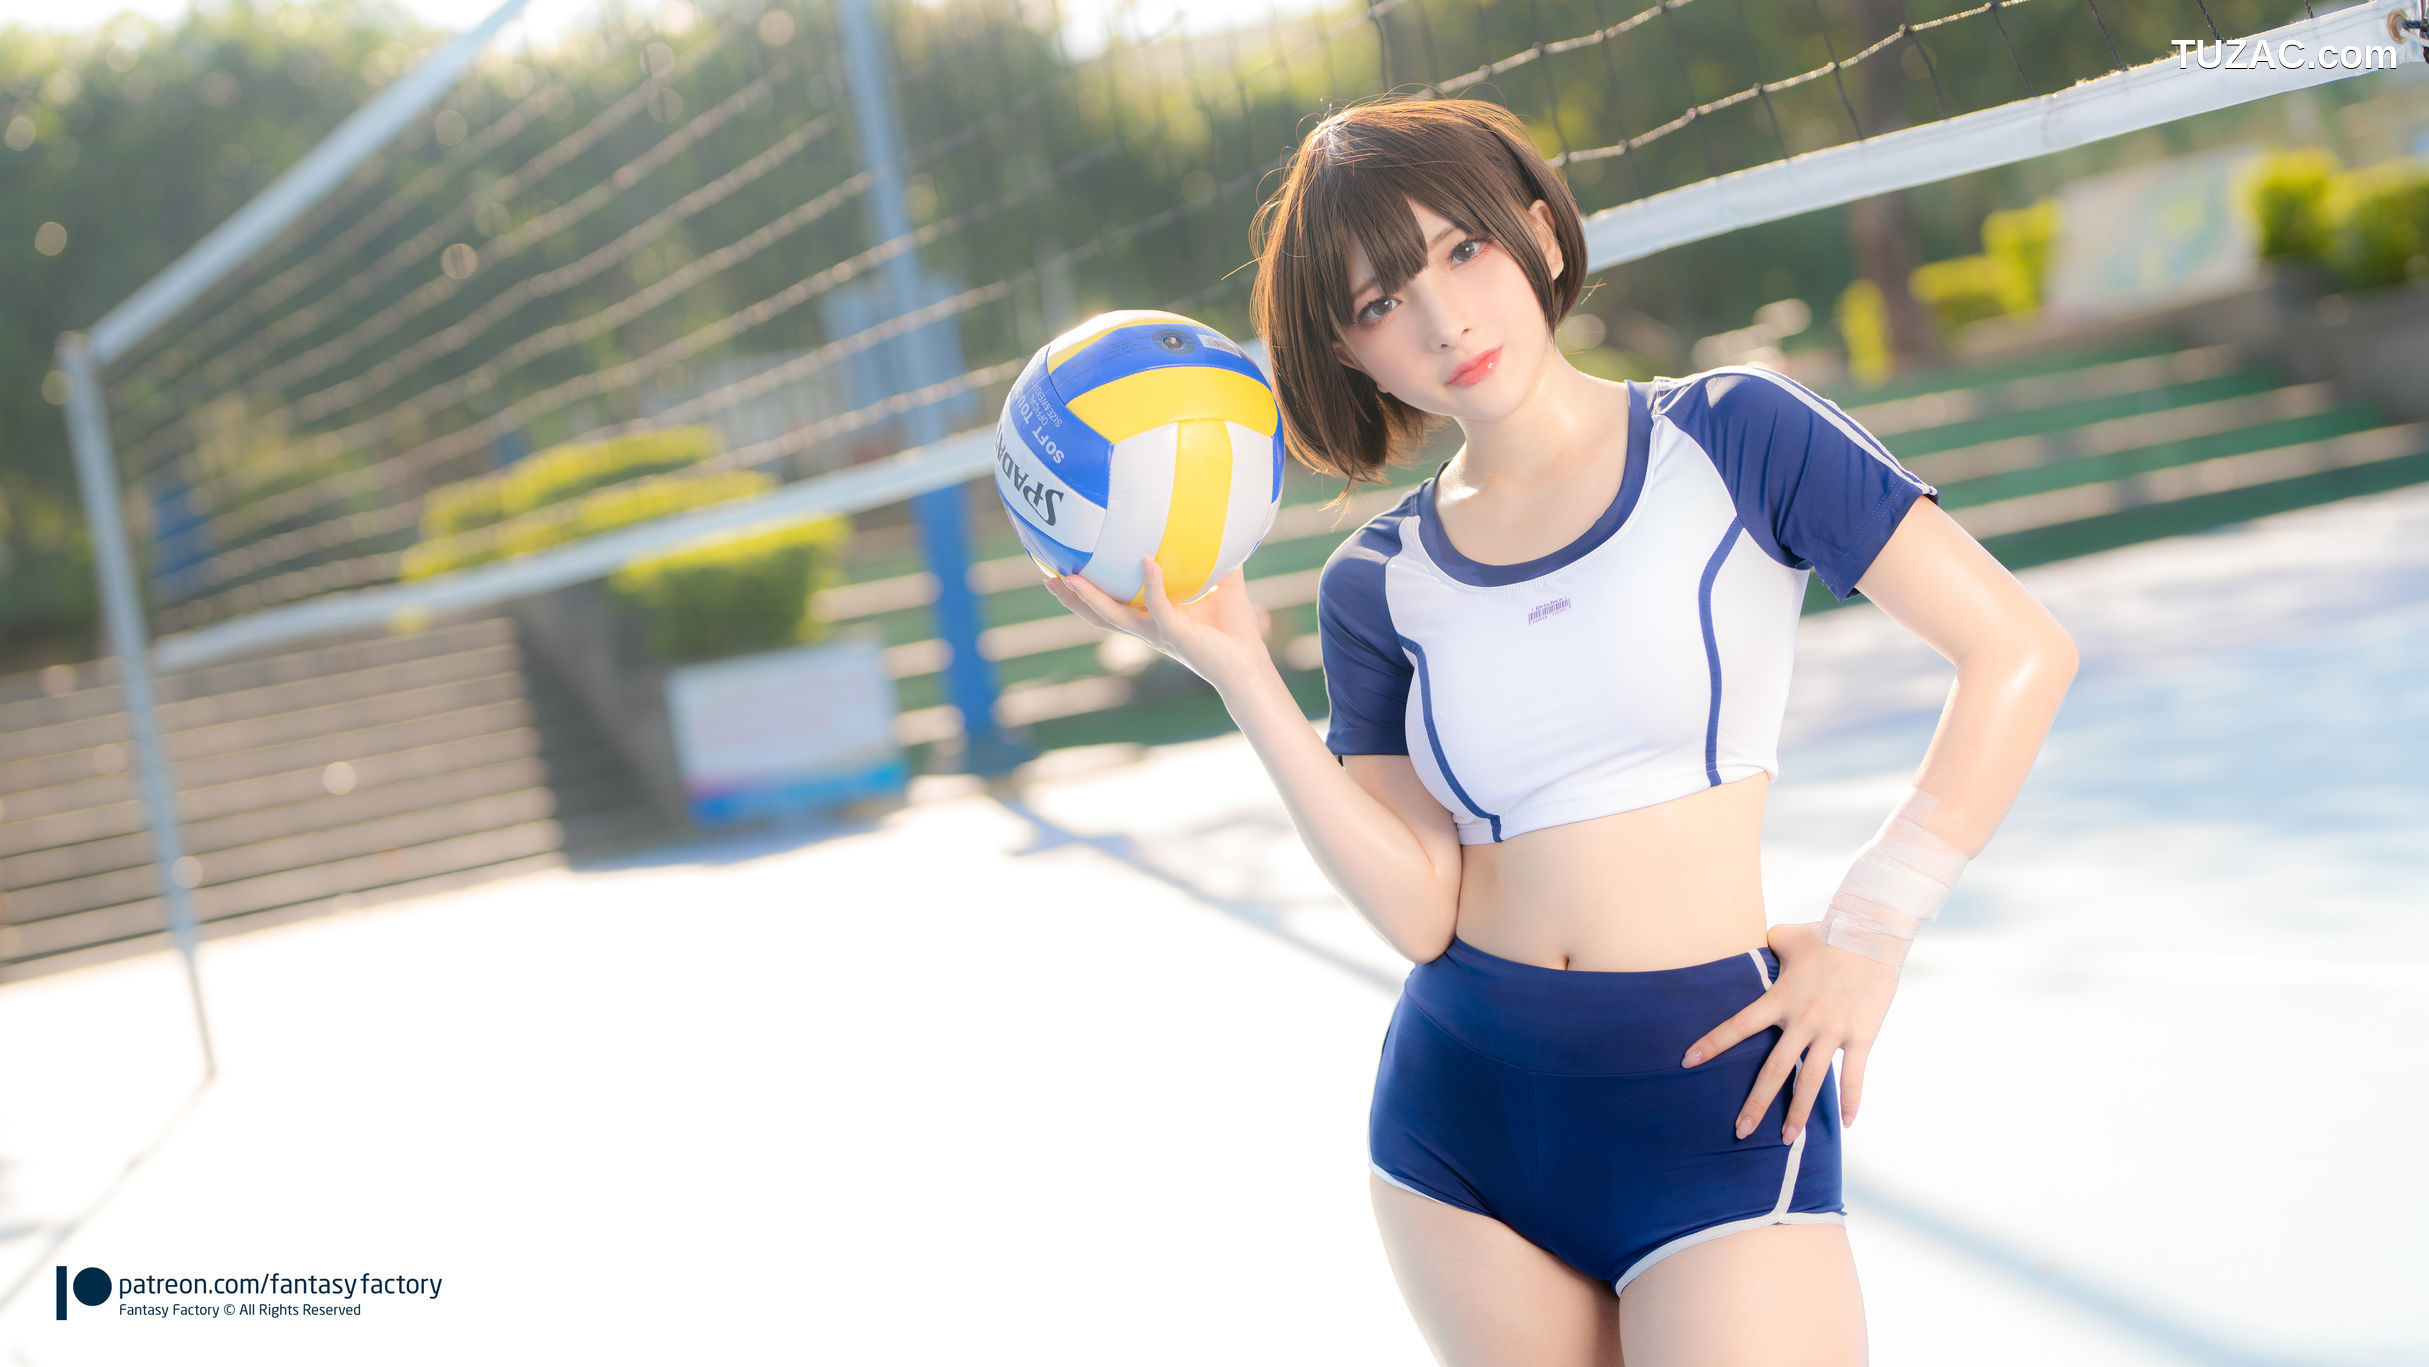 Fantasy-Factory-小丁Ding-排球少女-Volleyball-Girl-2022.03